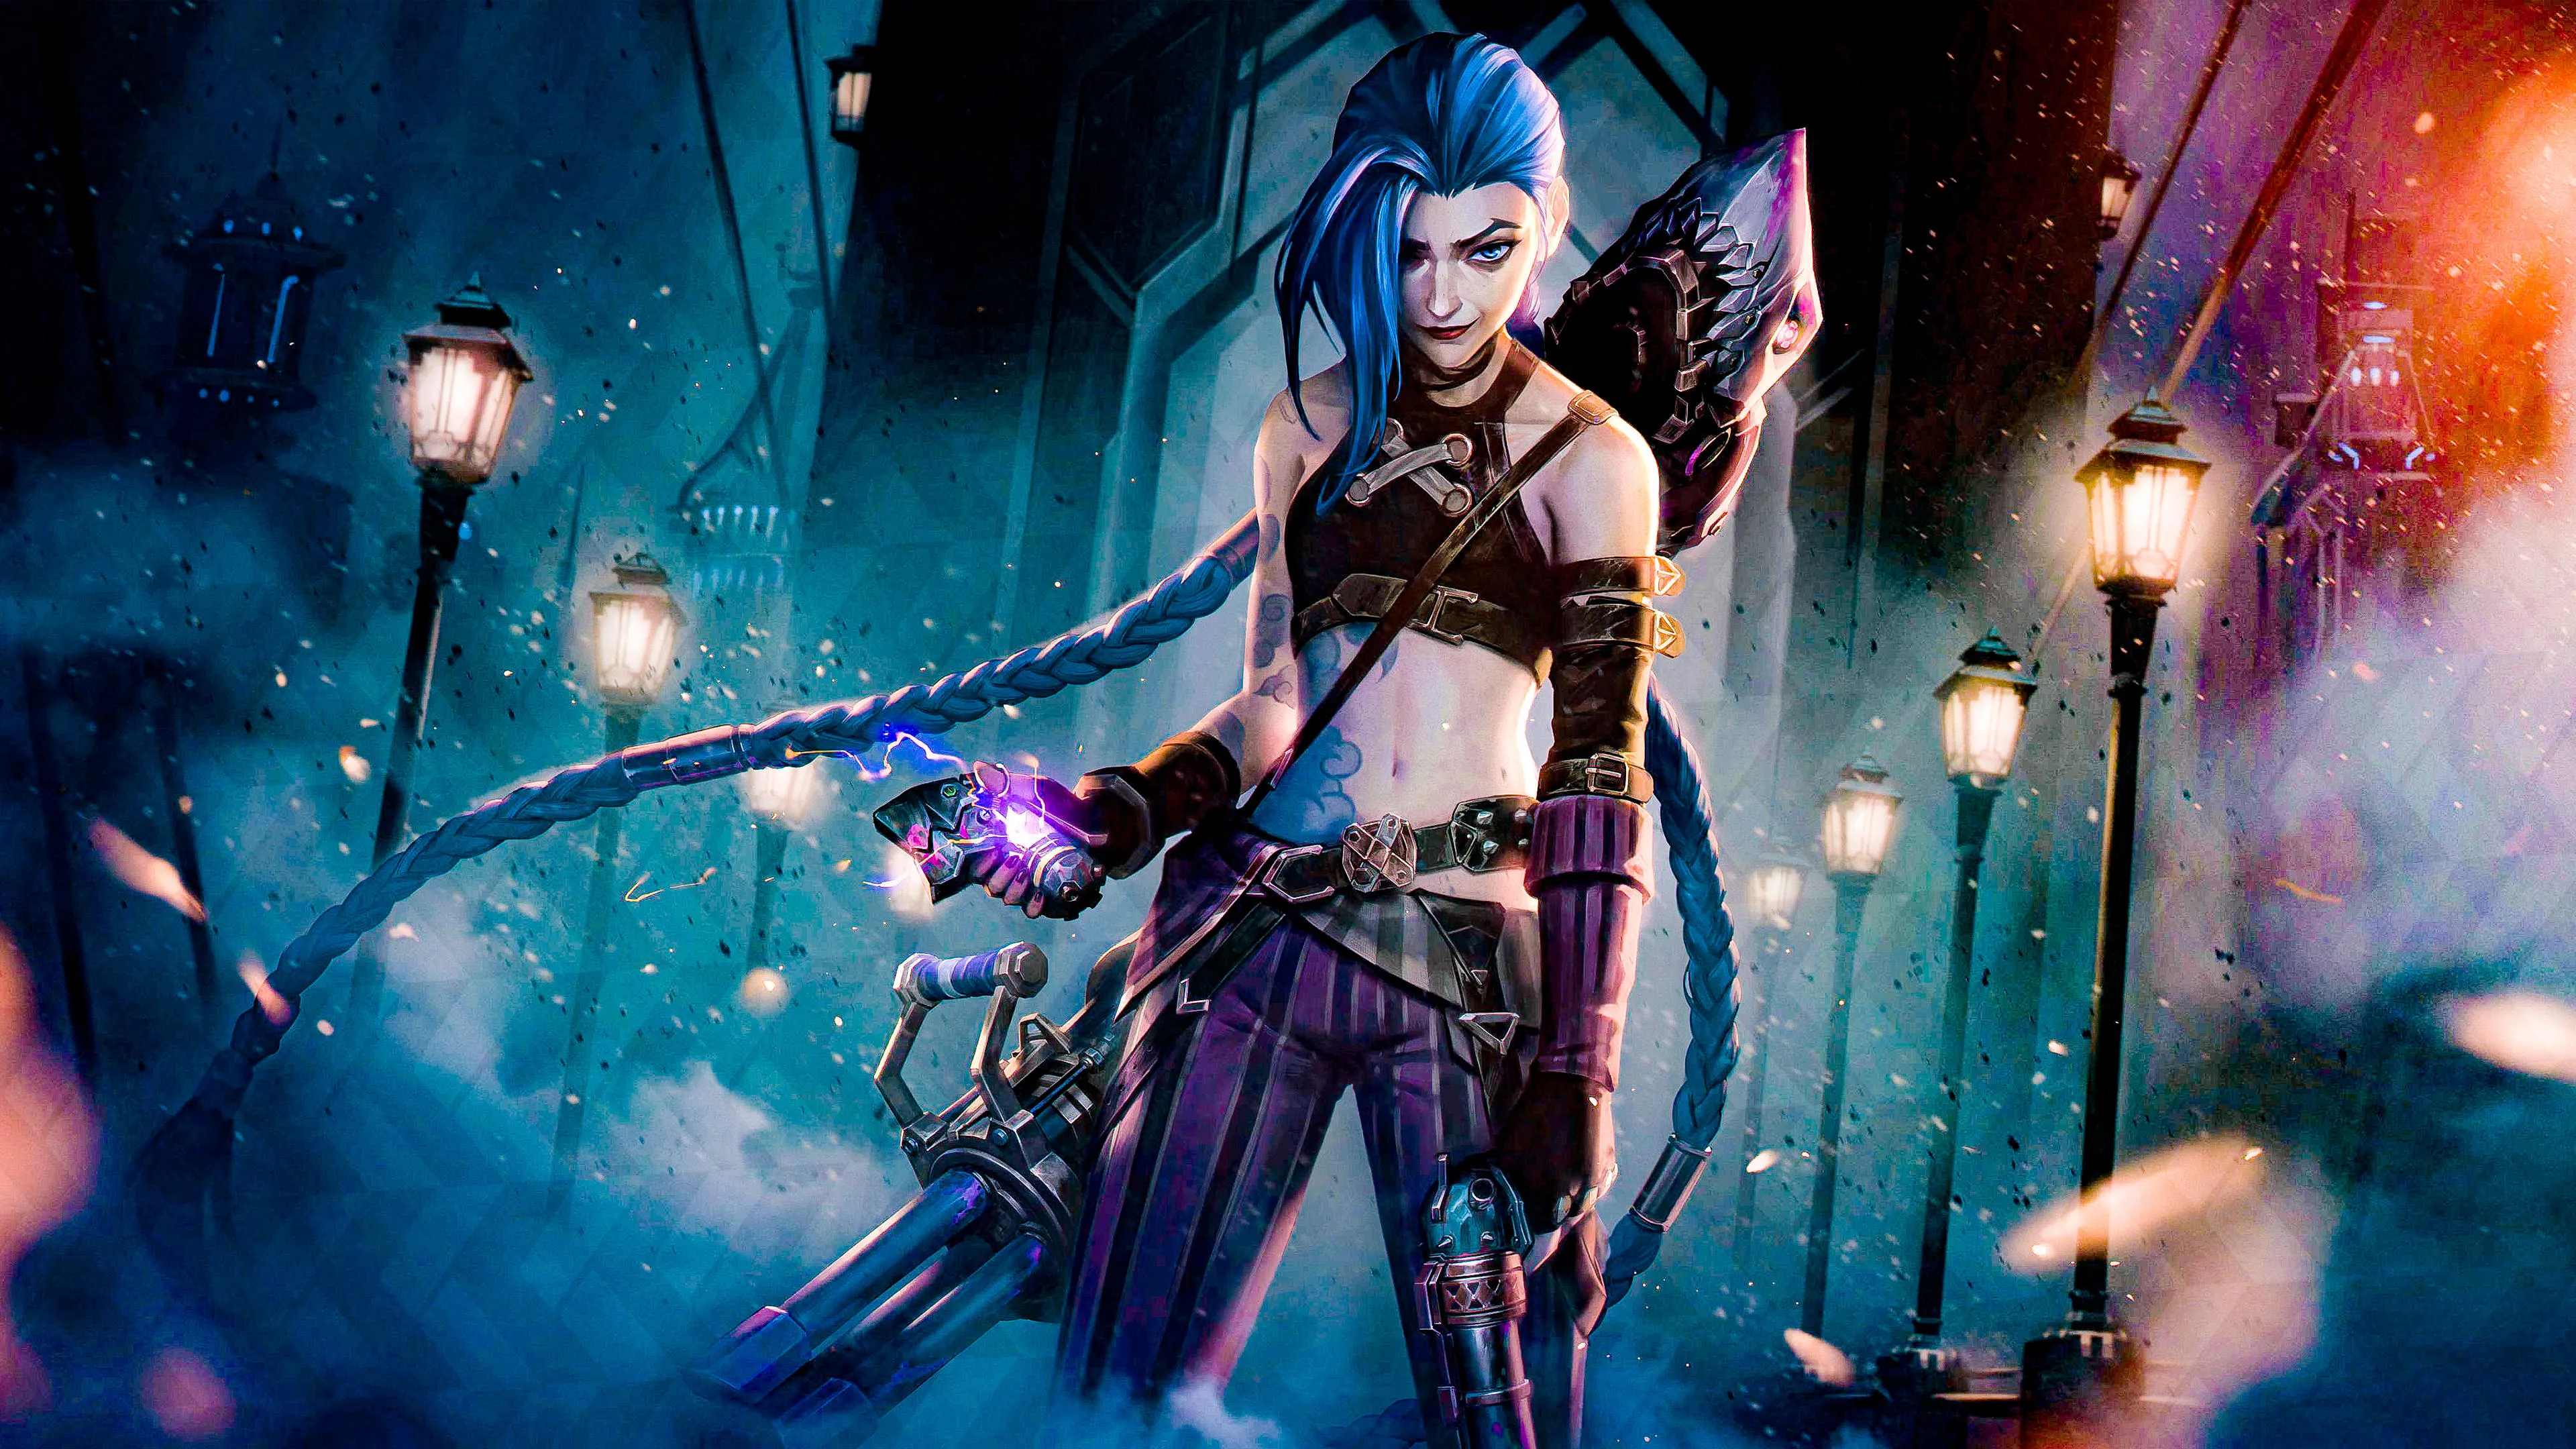 Jinx & Powder  Arcane (League of Legends) - Finished Projects